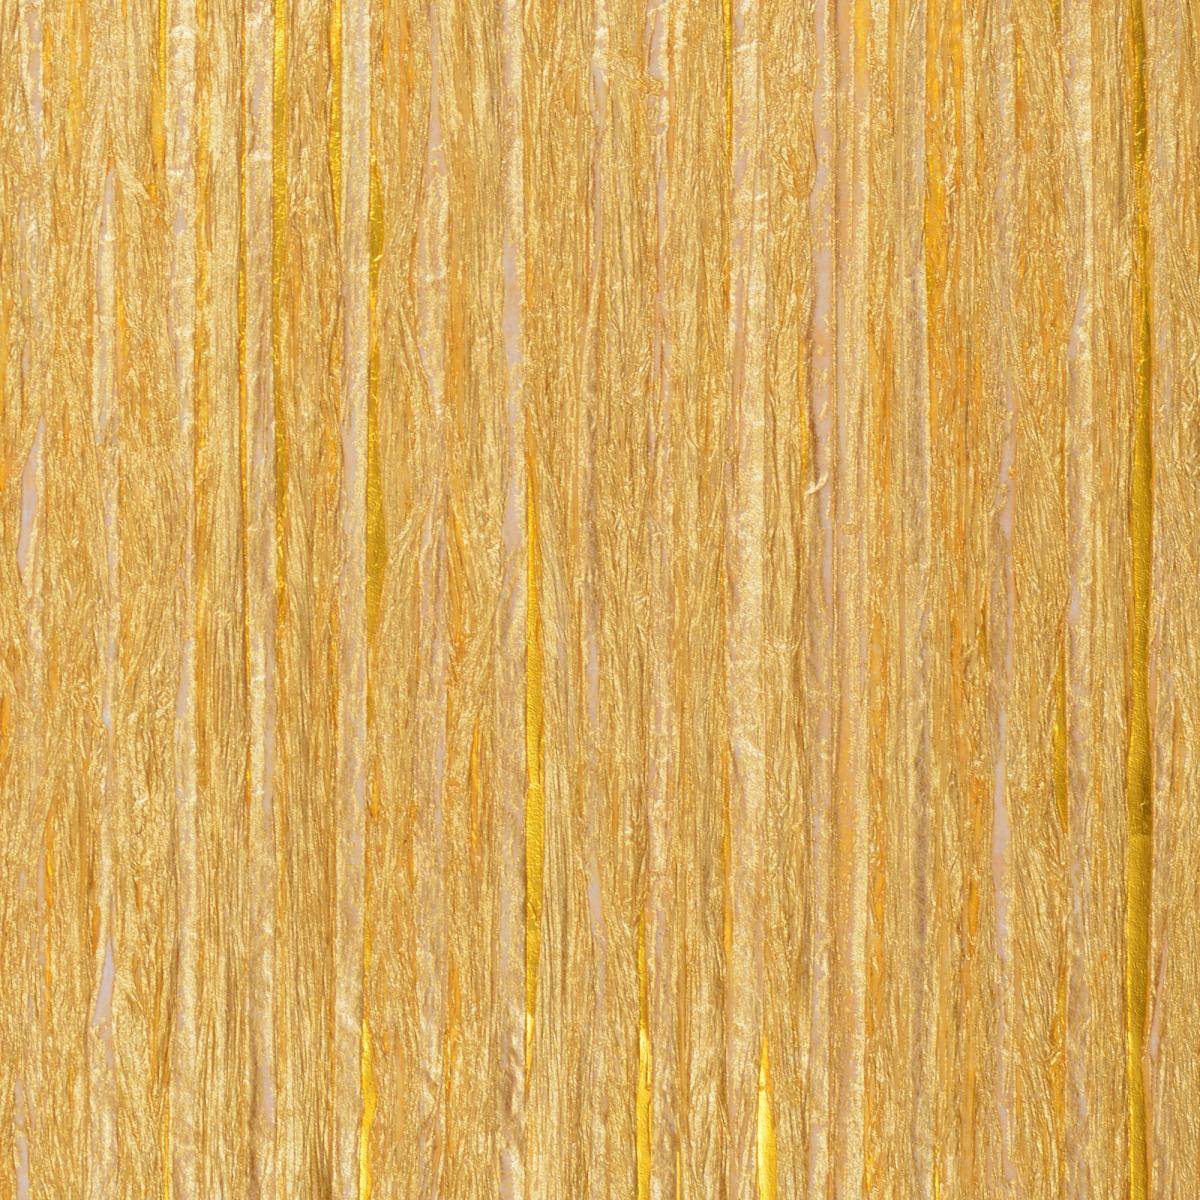 Plywood , HD Wallpaper & Backgrounds